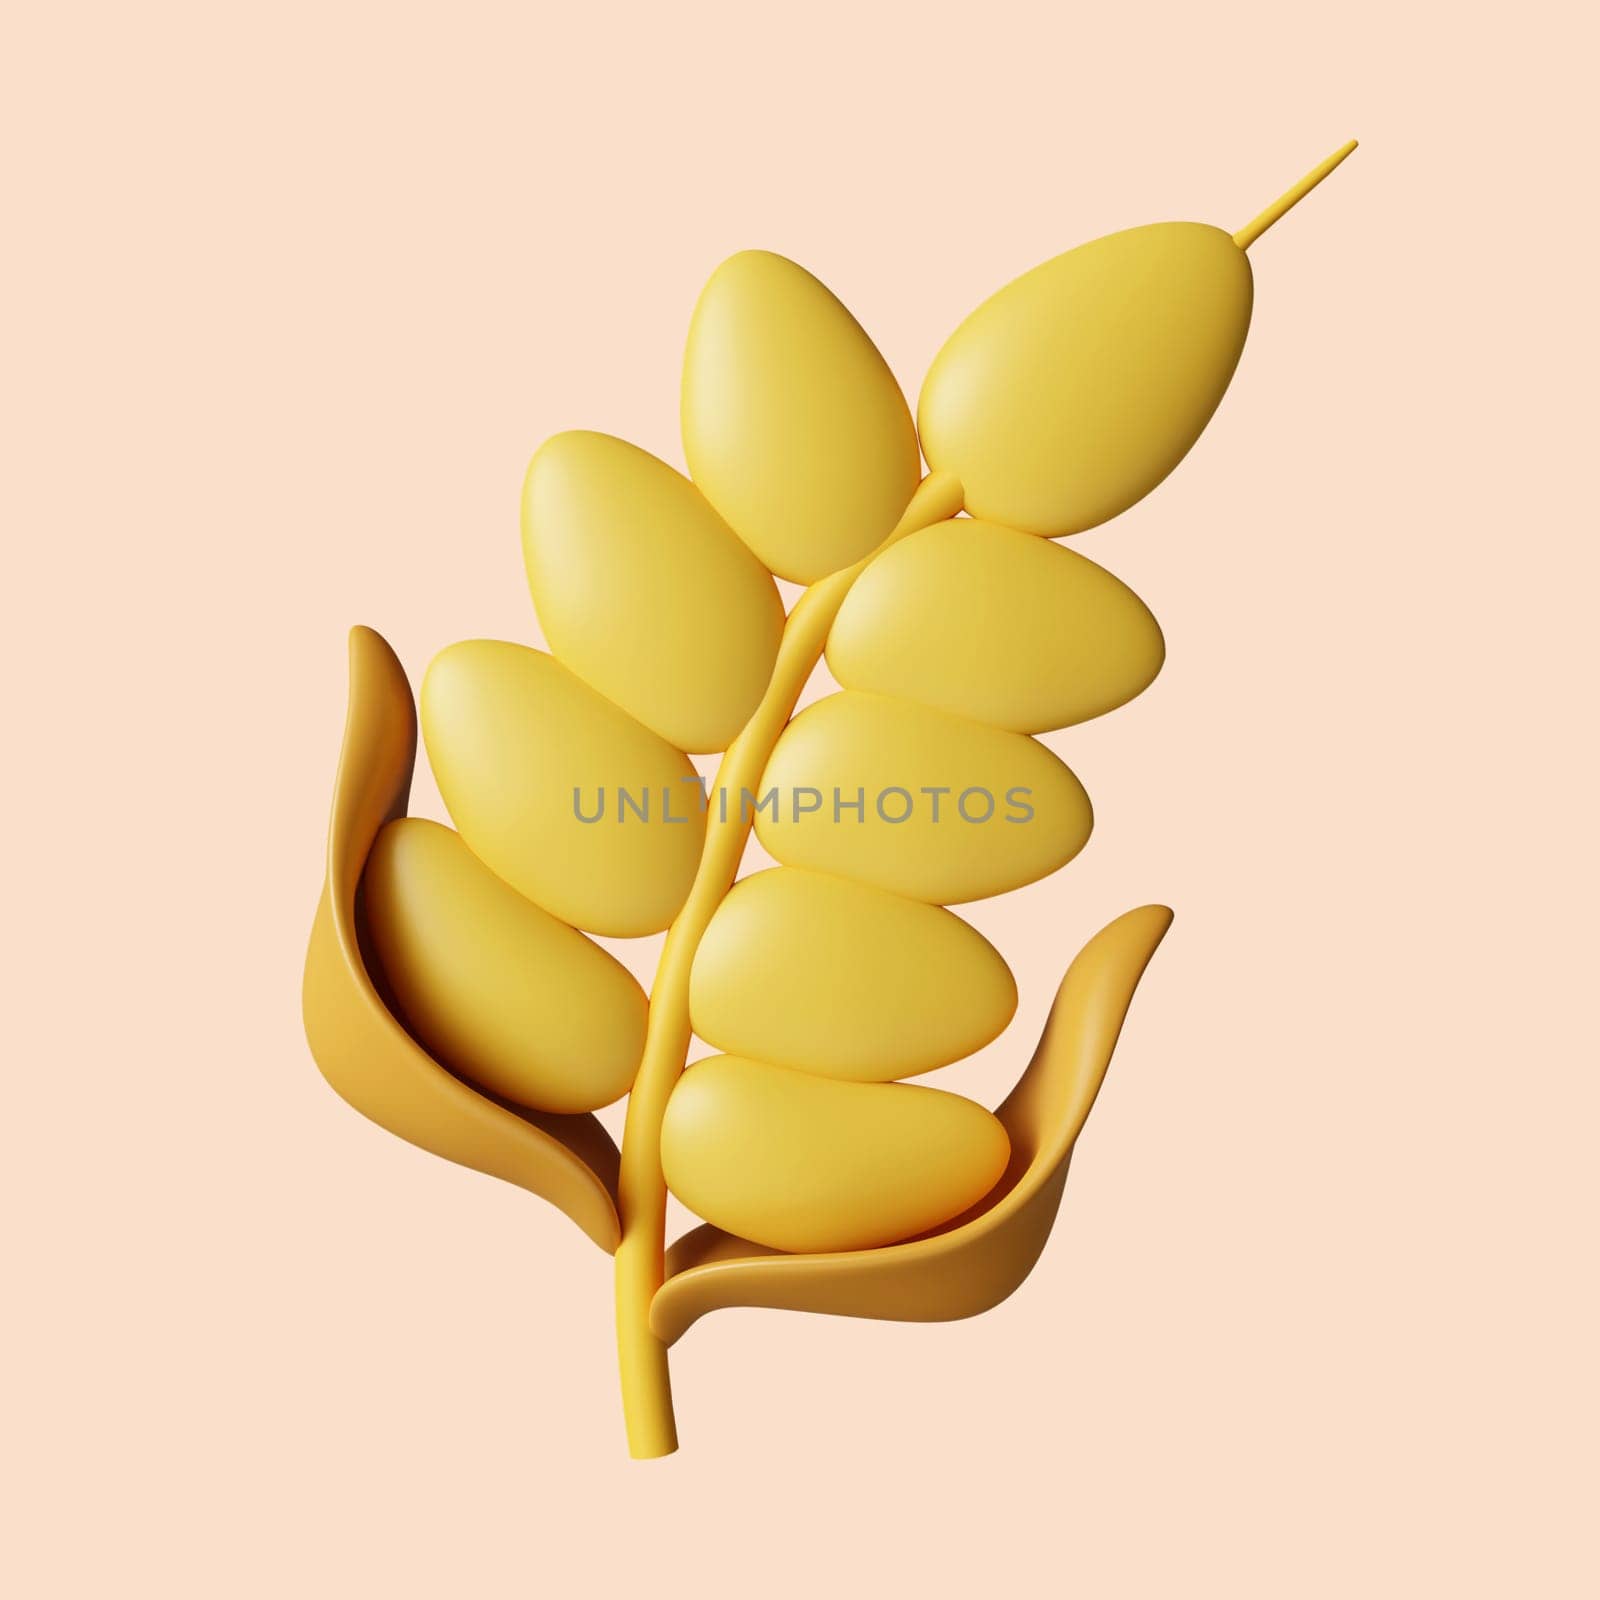 3d Autumn barley. Golden fall. Season decoration. icon isolated on gray background. 3d rendering illustration. Clipping path. by meepiangraphic